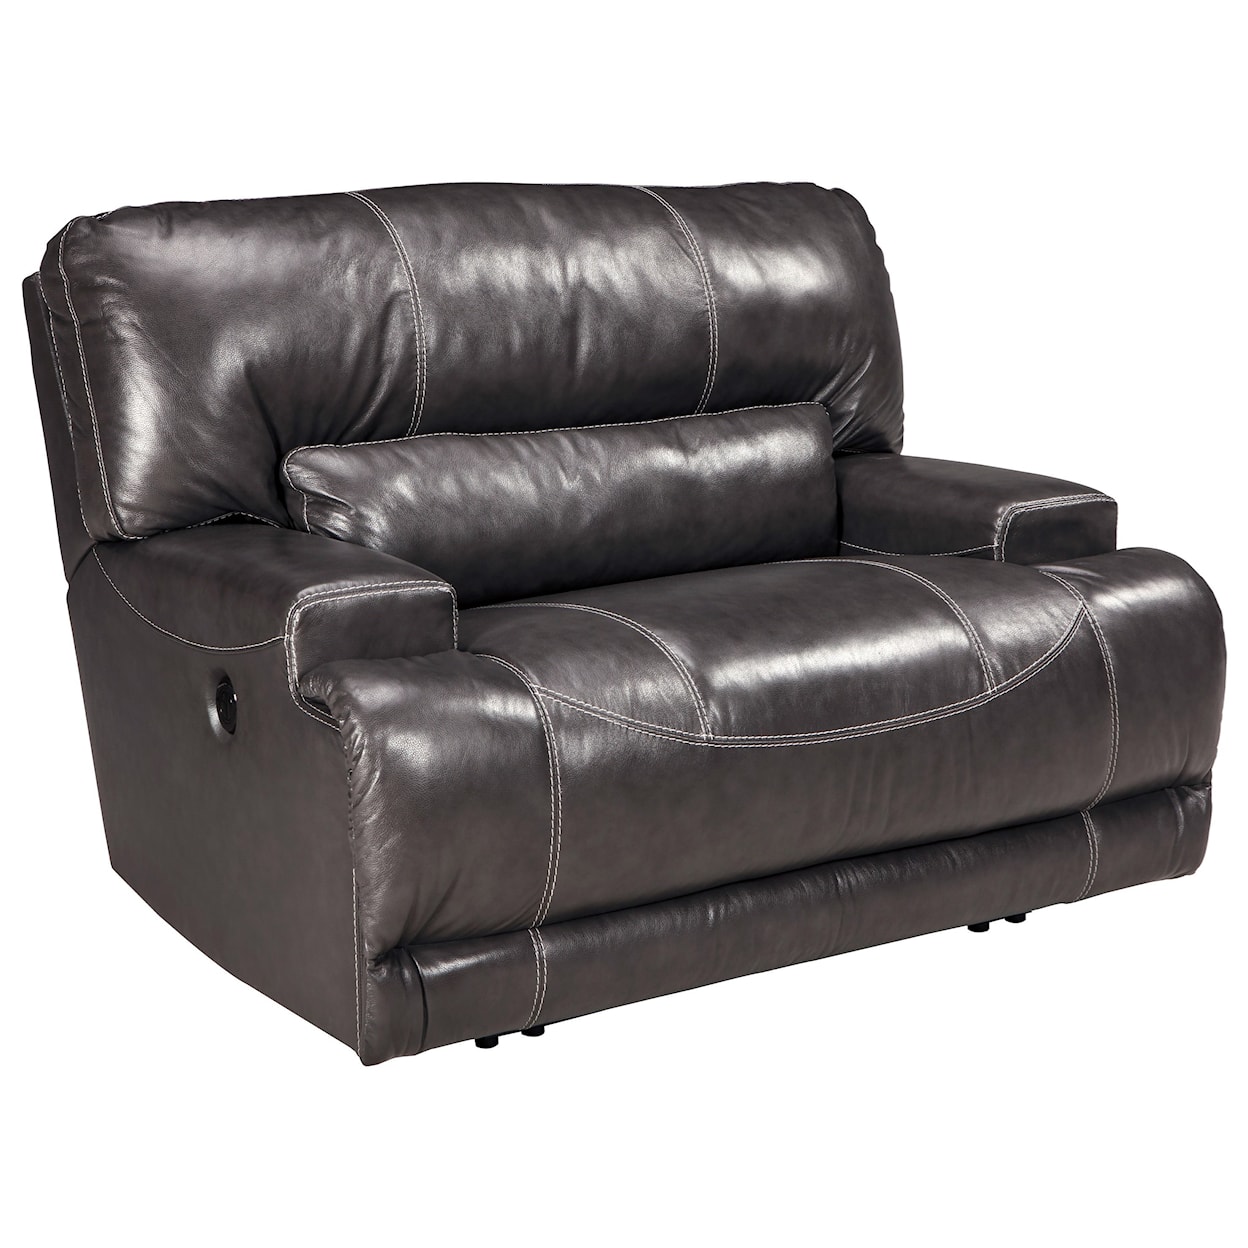 Signature Design by Ashley McCaskill Wide Seat Recliner